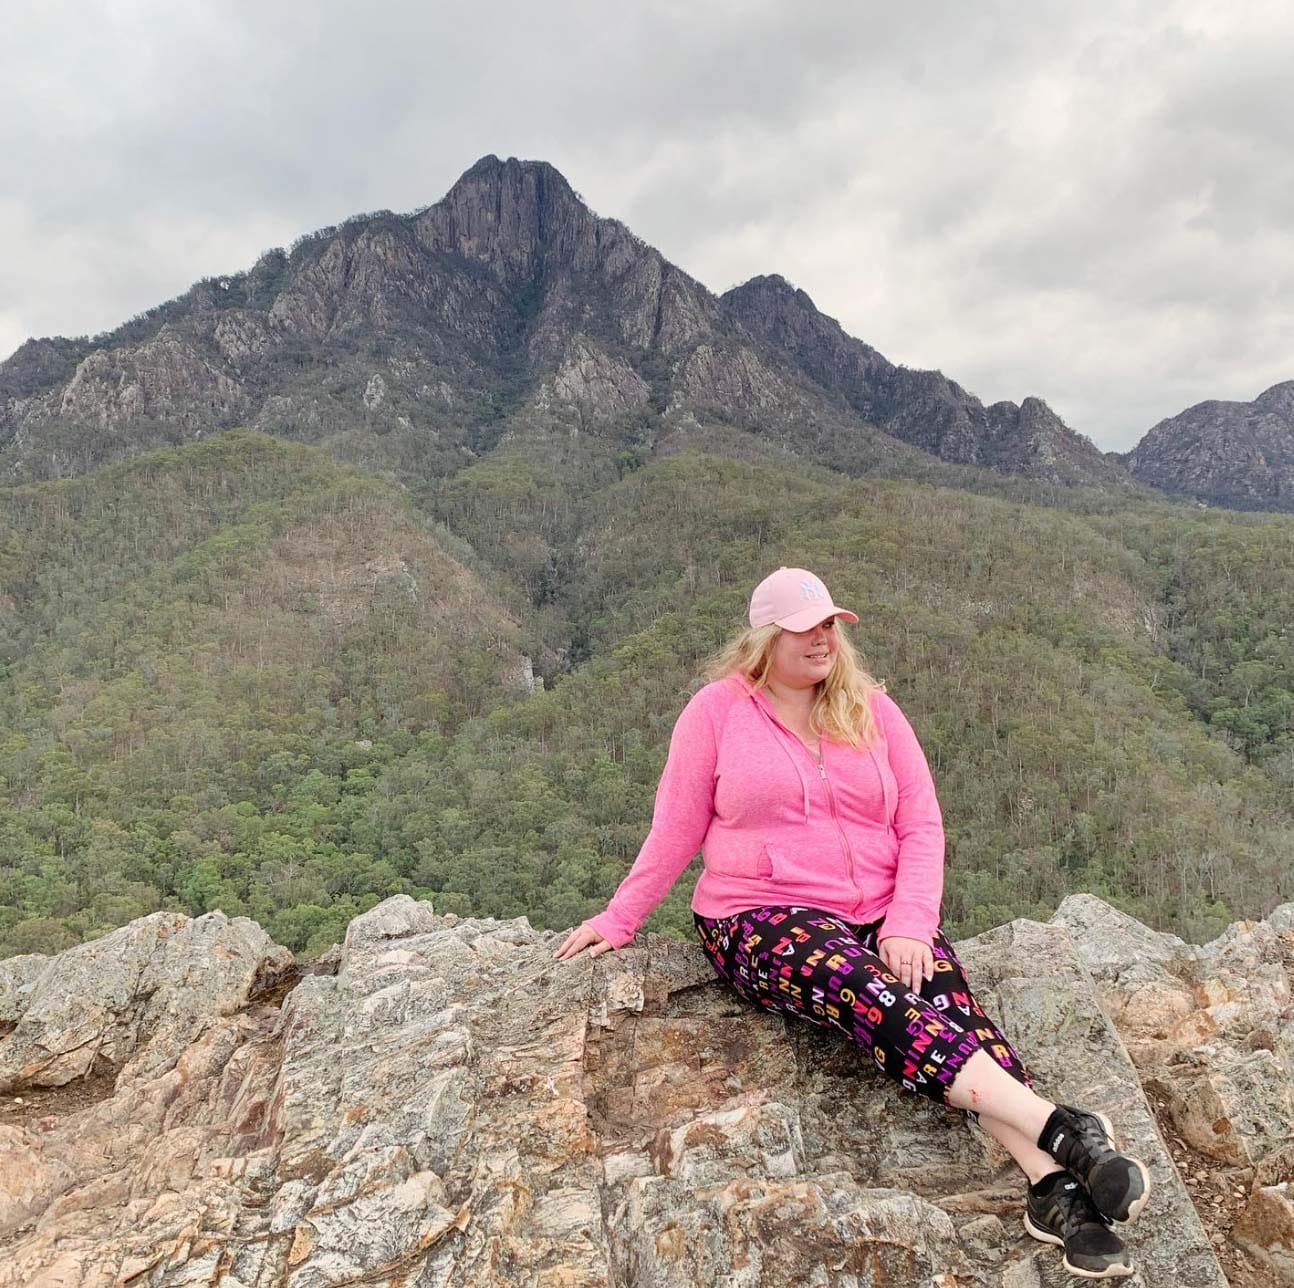 Refinery29 - A Gear Guide For Plus-Size People Who Love Hiking